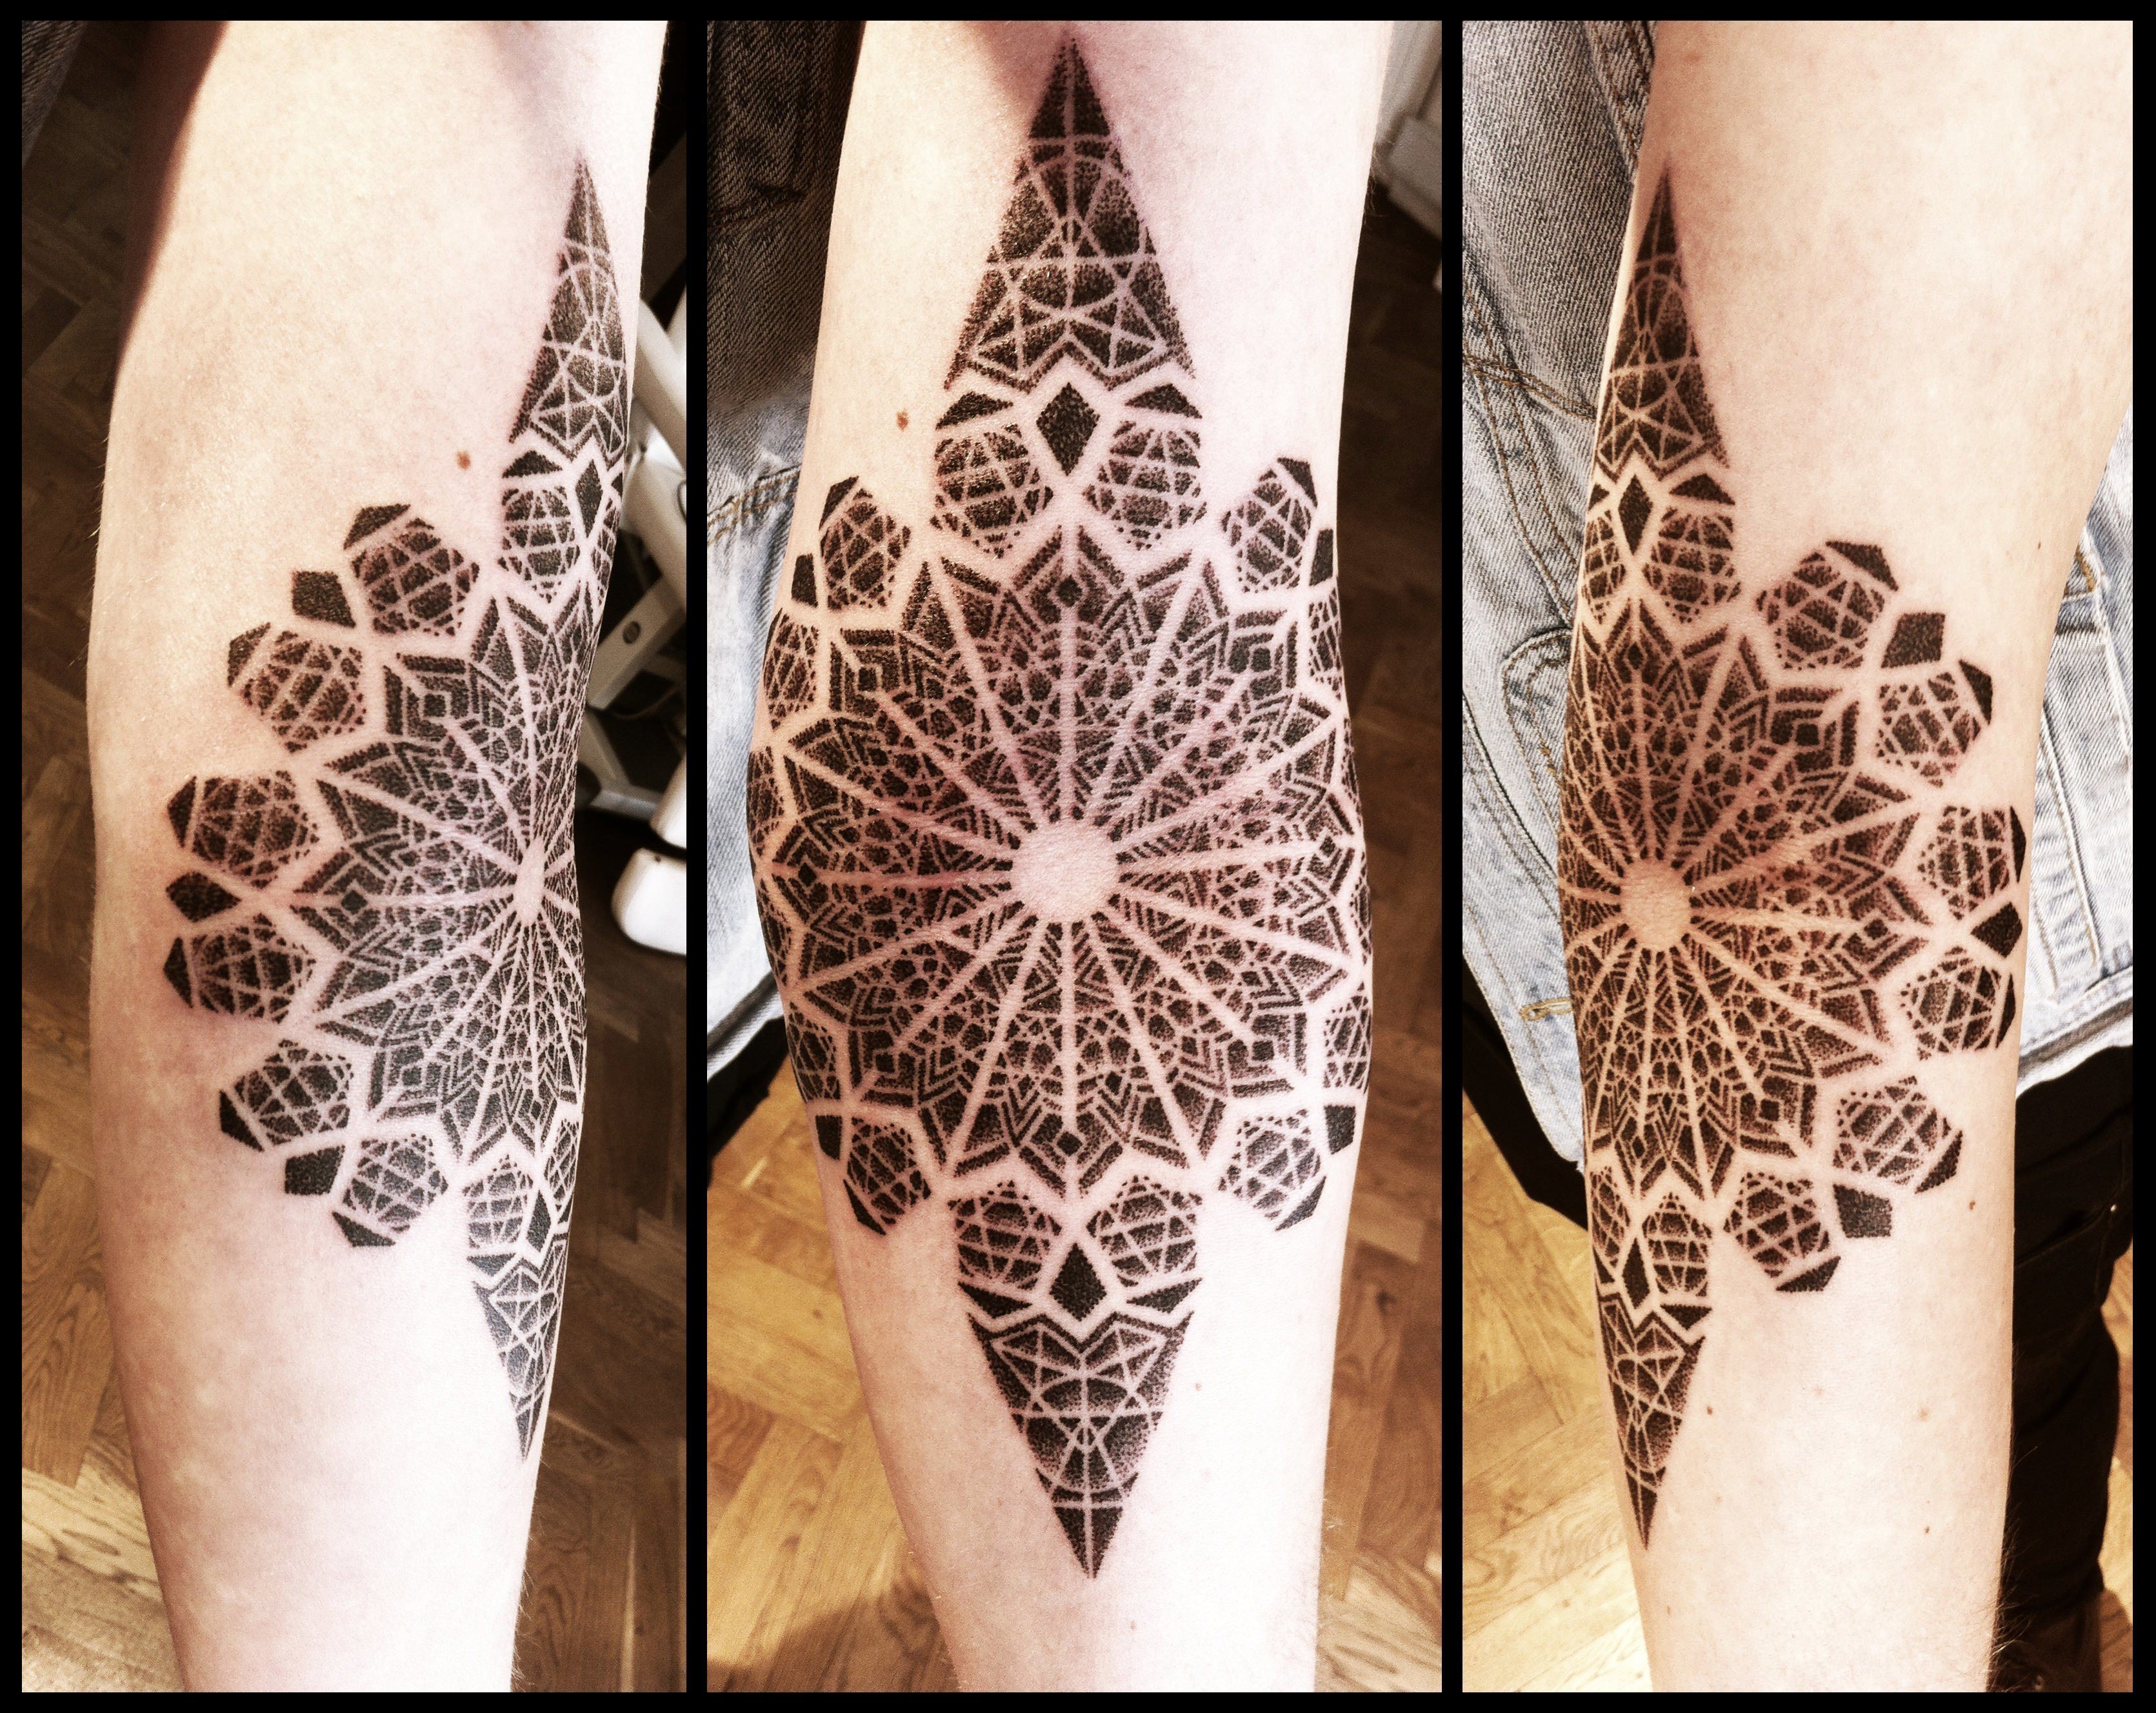 Peter Madsen uses a dotwork technique and fine detail to create a lacy, feminine mandala tattoo